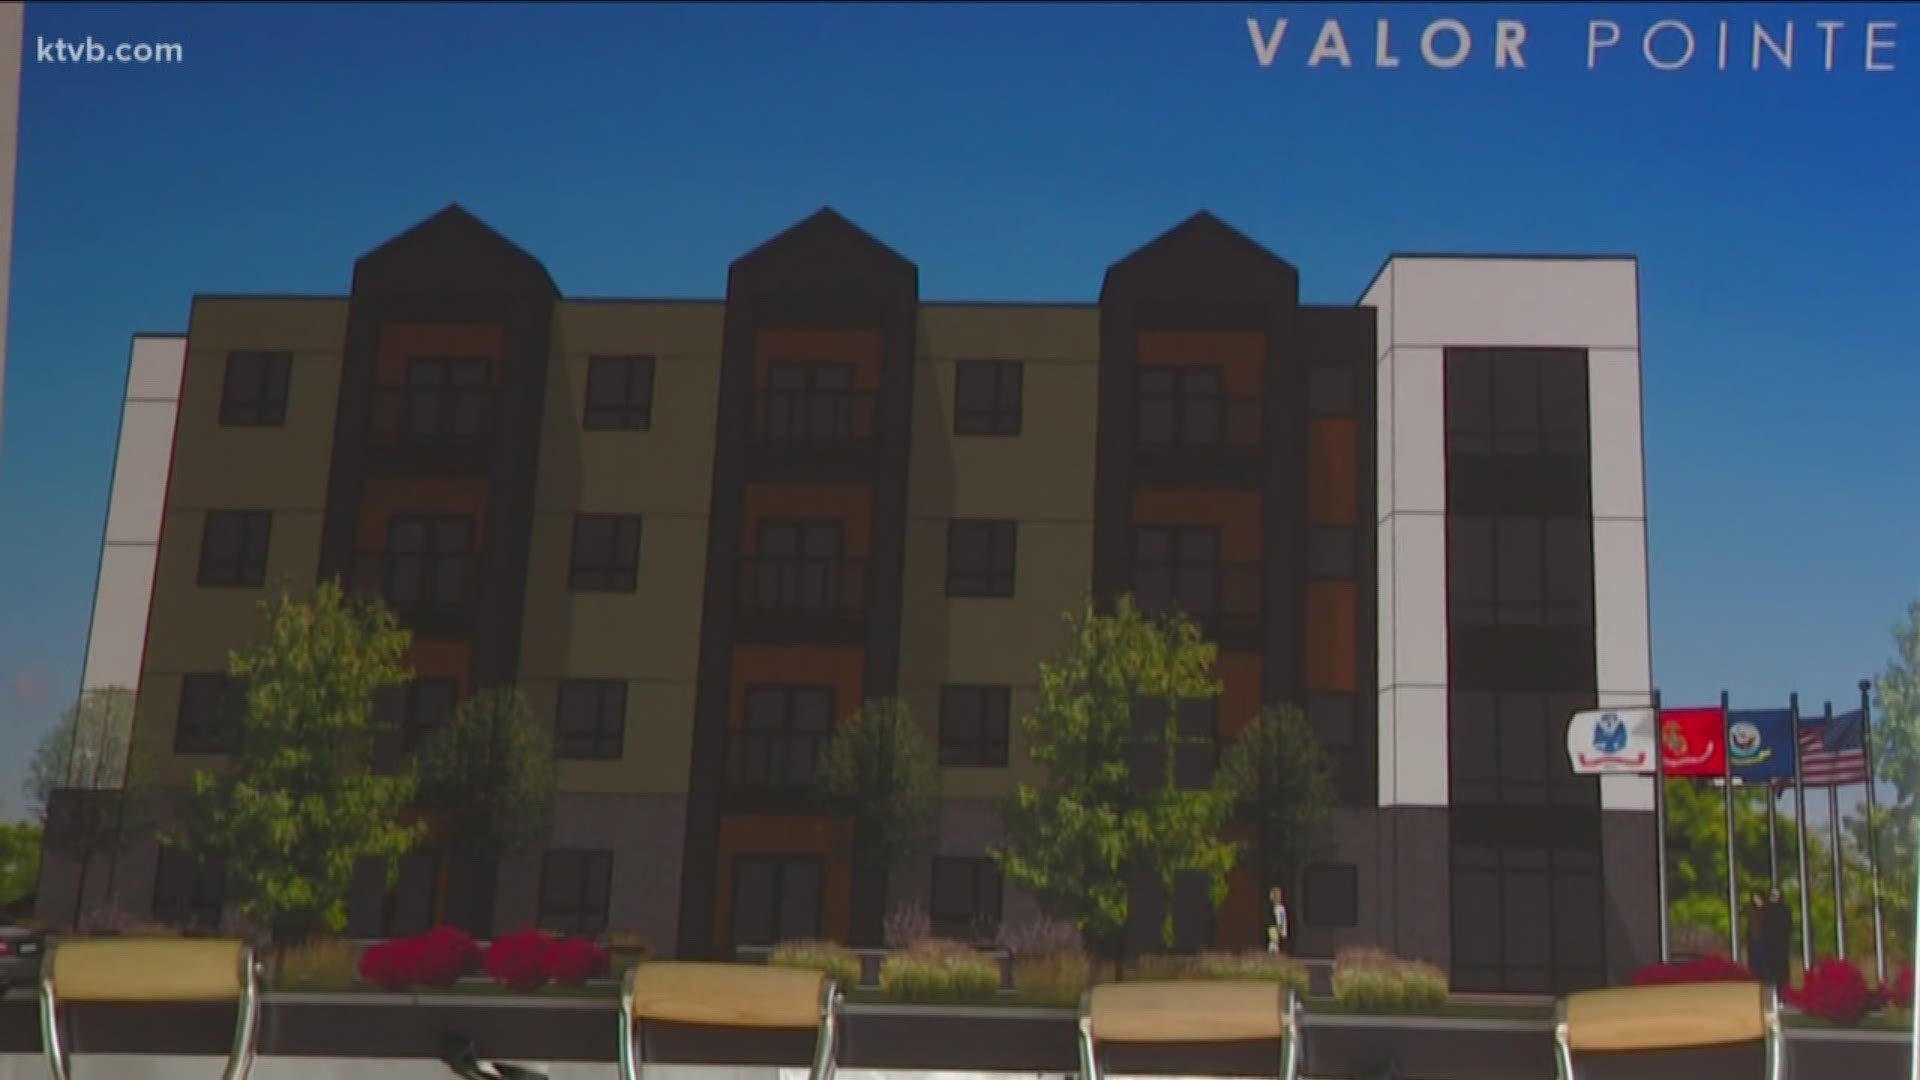 The development costs $6 million but will provide housing and services to veterans that will help put homeless veterans on the path to self-sufficiency.